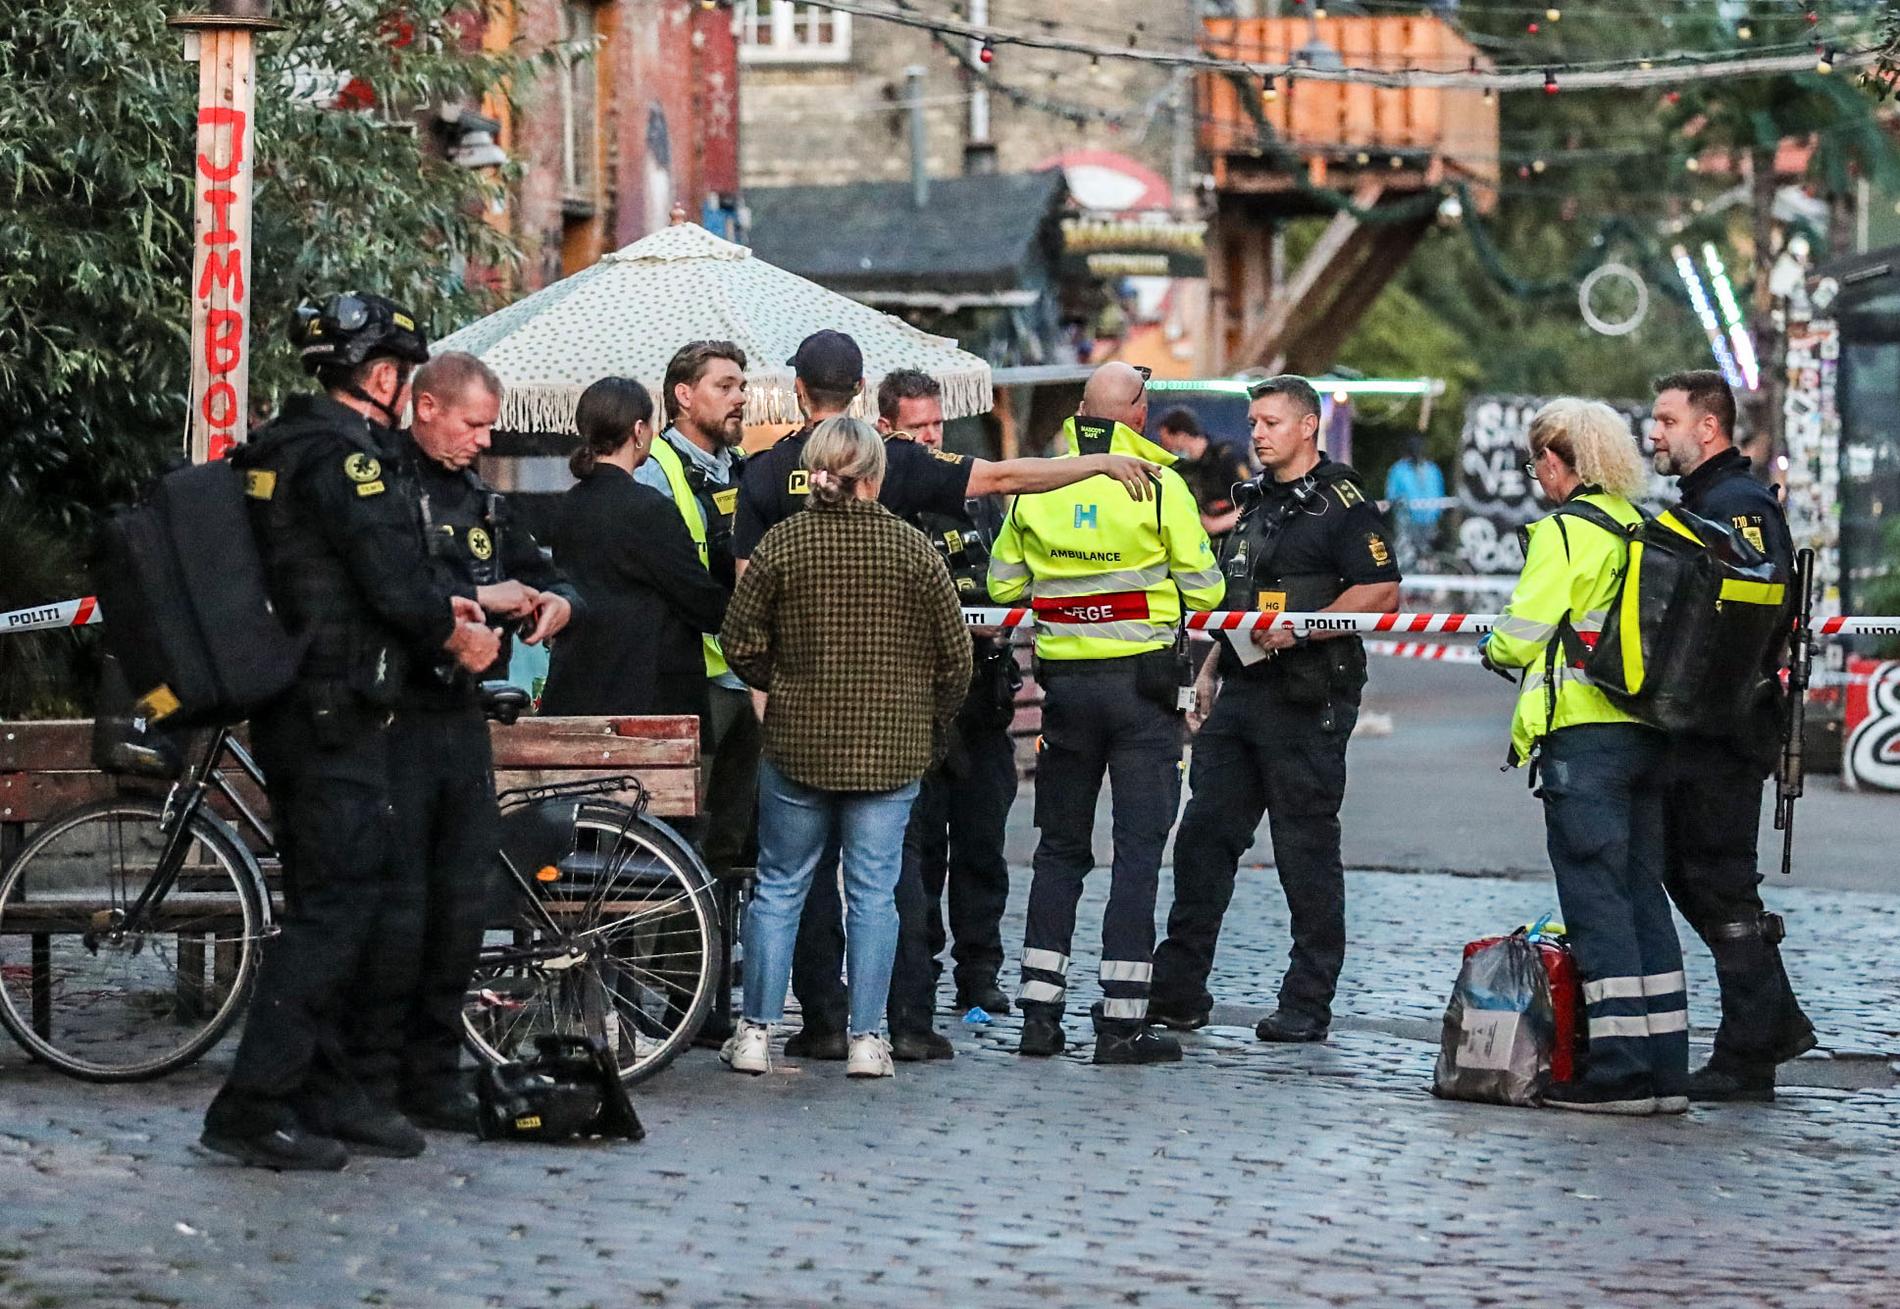 Shooting Incident in Christiania: Copenhagen Police and Emergency Services Respond